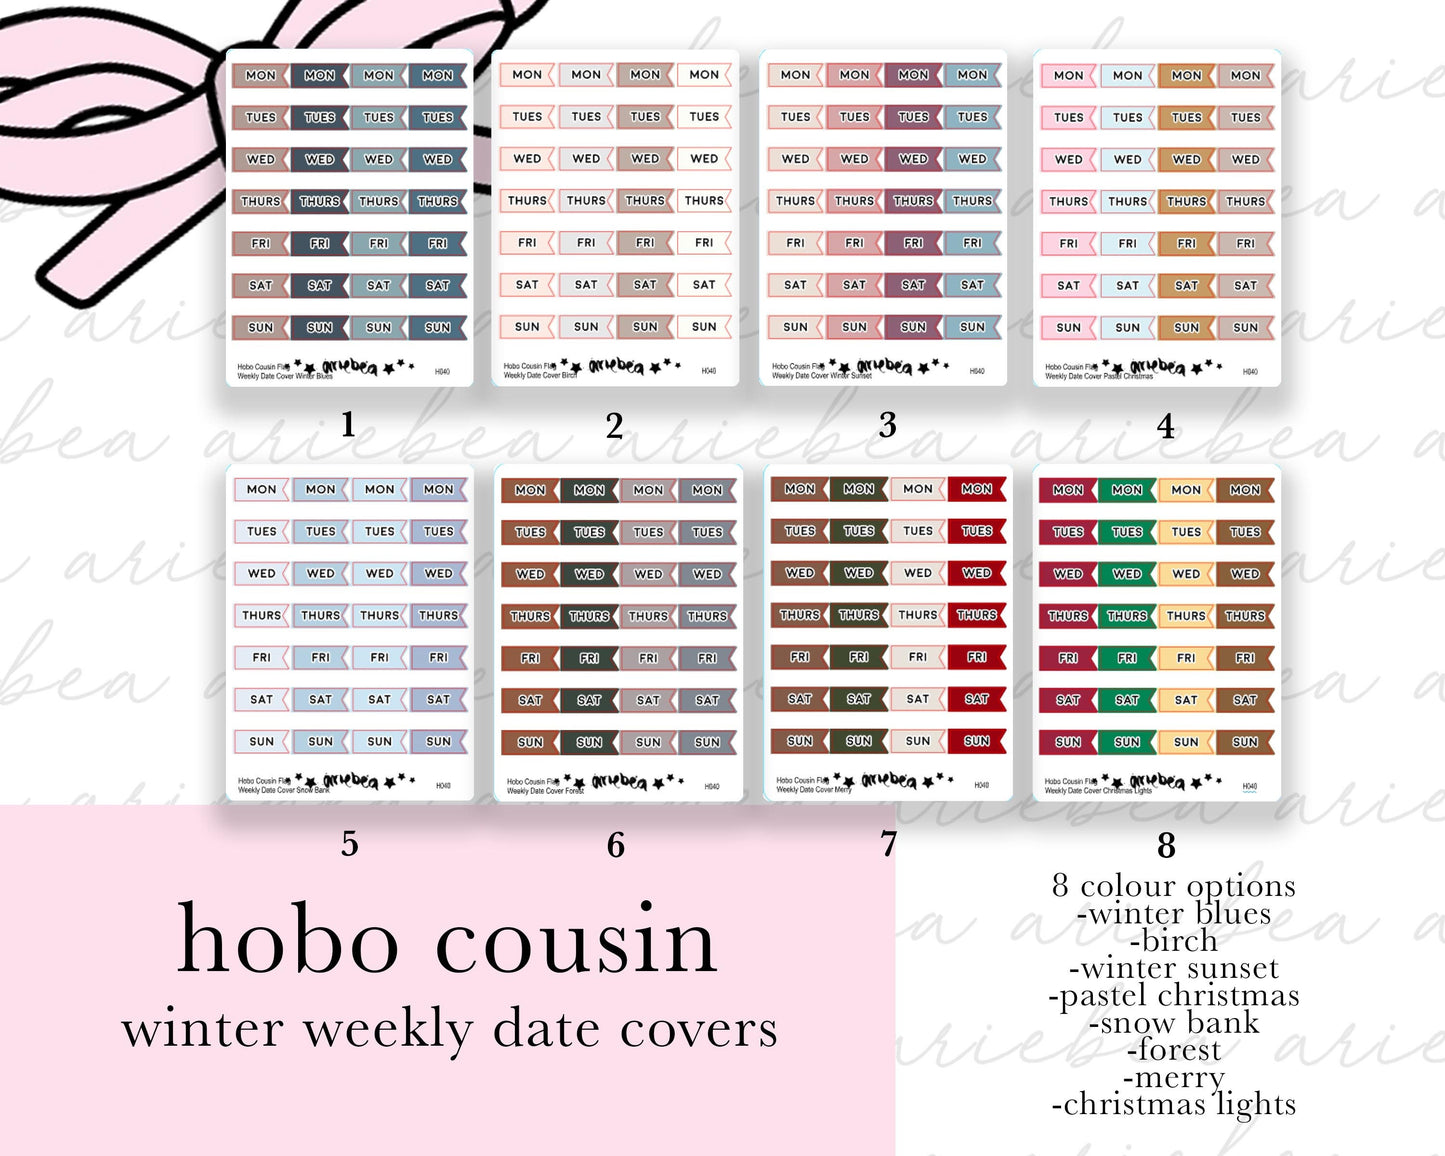 Winter Weekly Hobonichi Cousin Date Cover Flags Planner Stickers